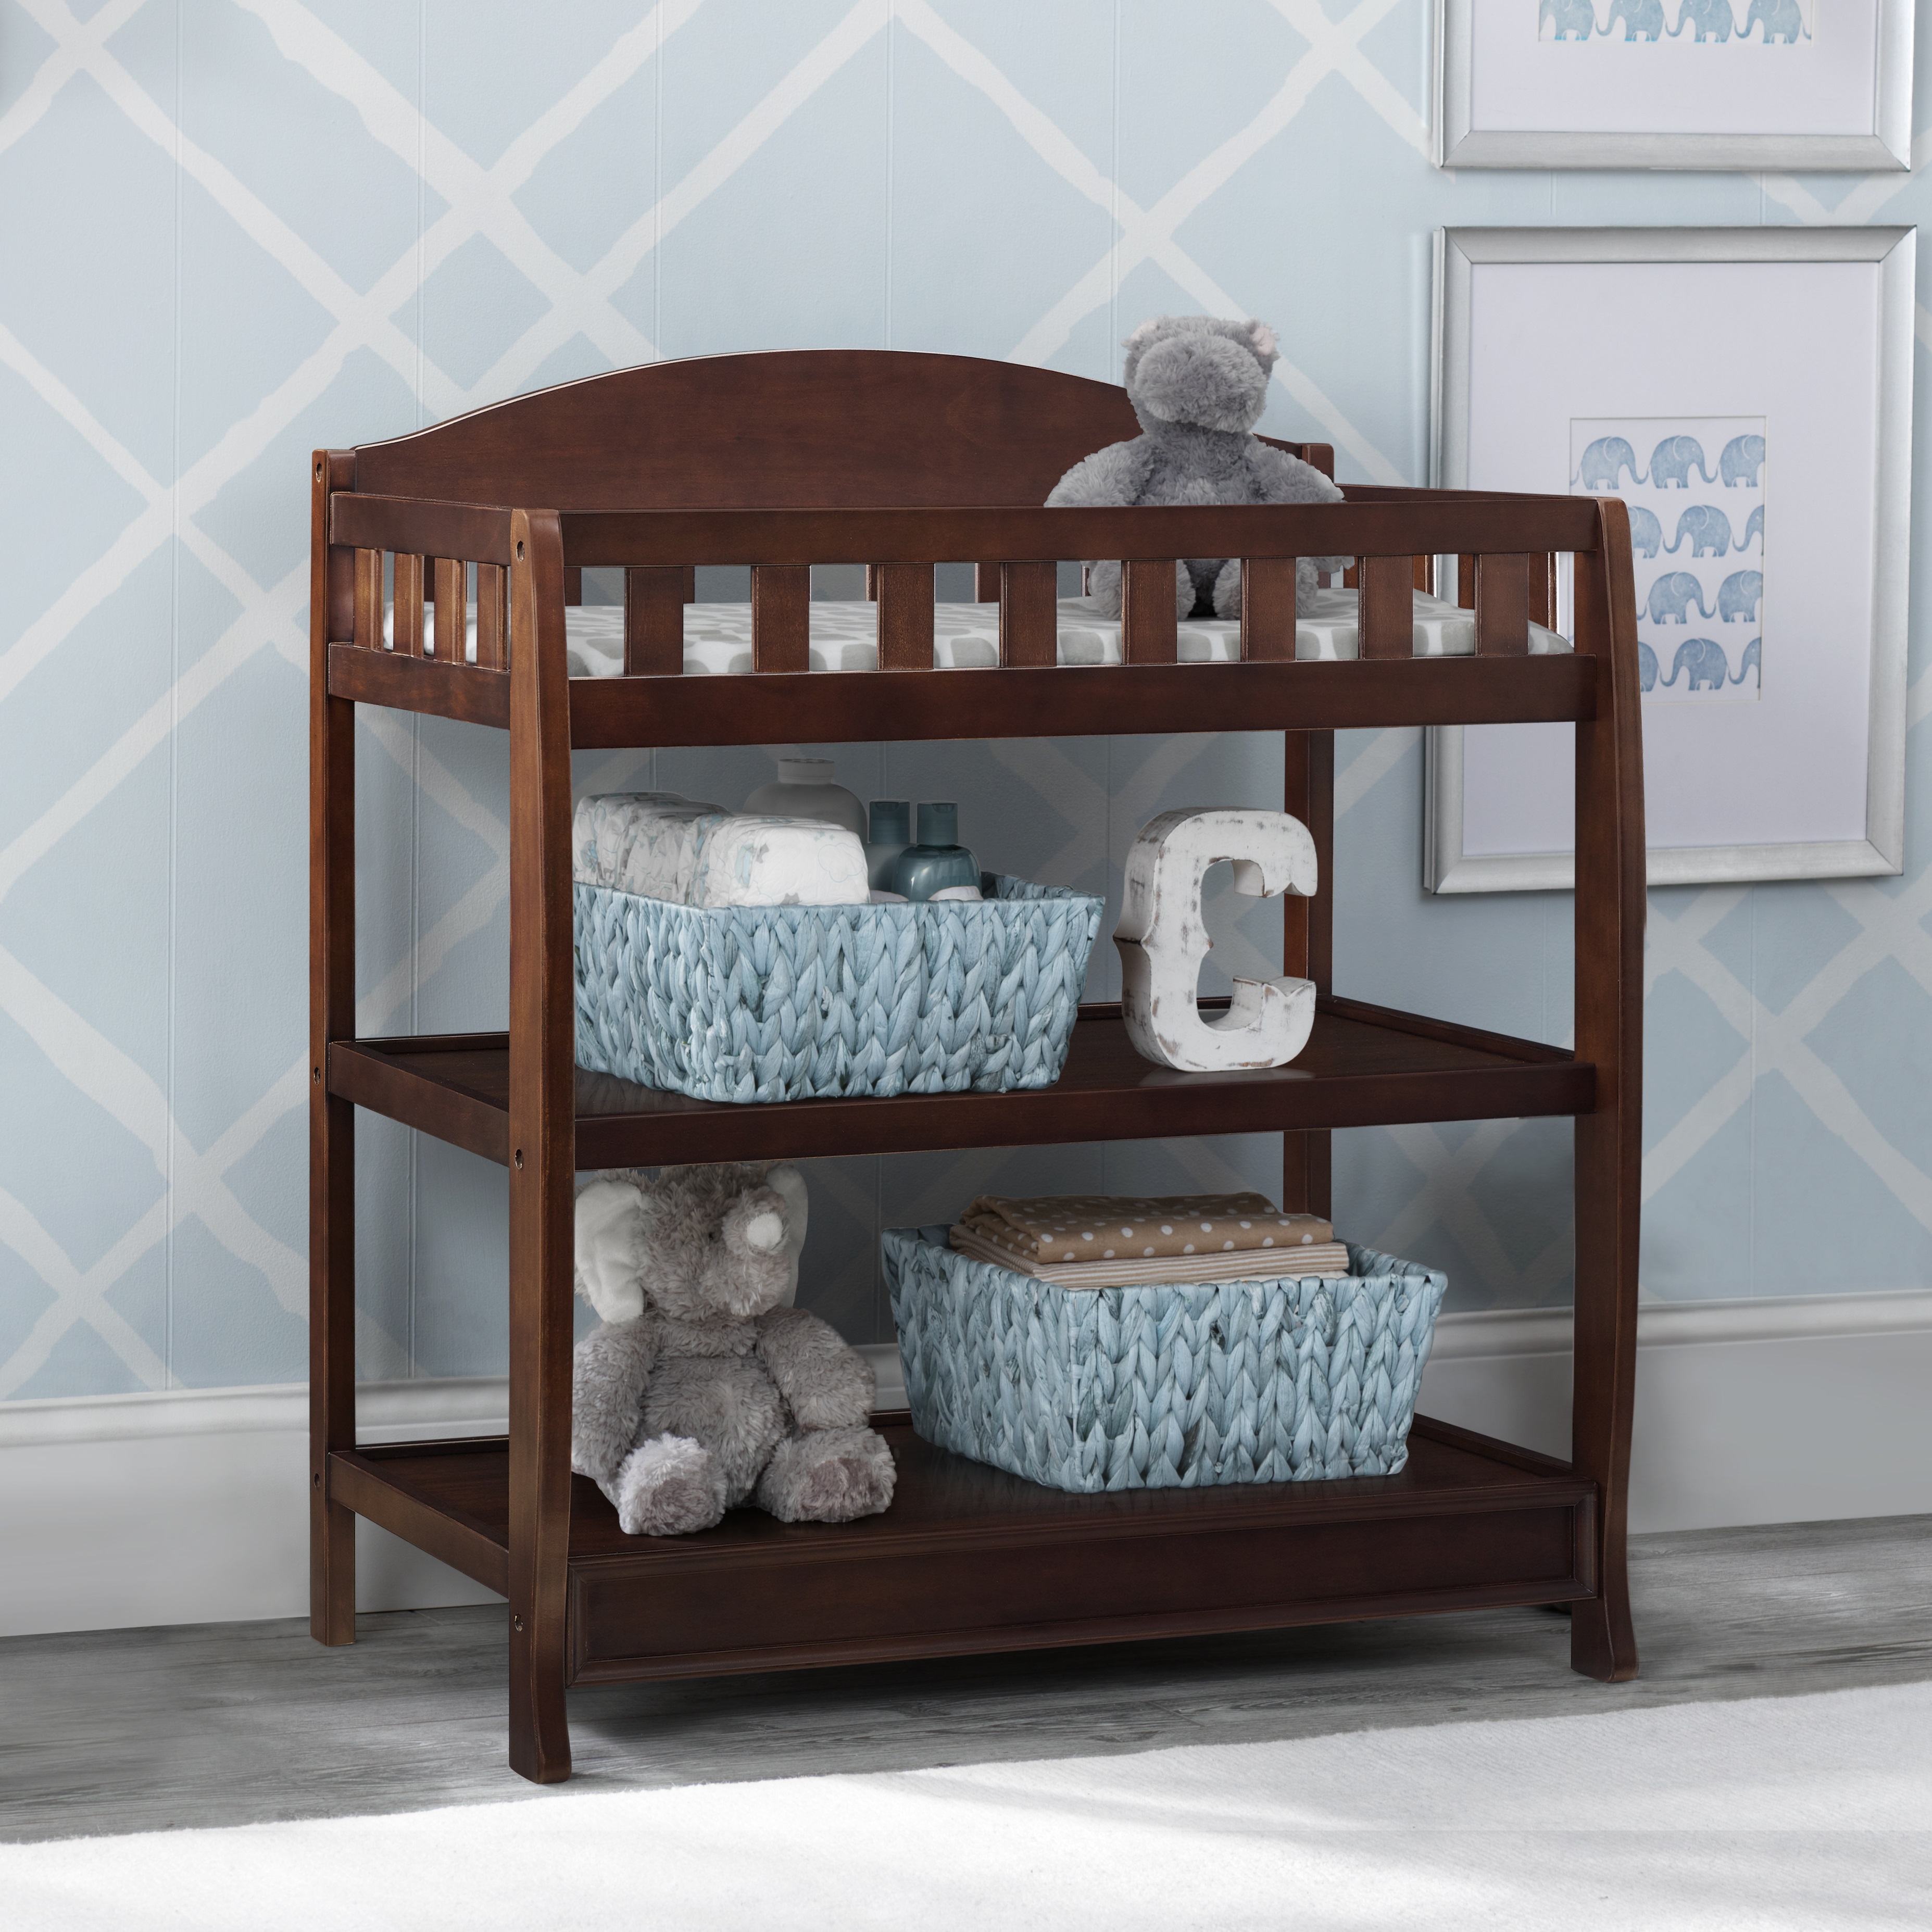 Delta Children Wilmington Changing Table with Pad, Walnut Espresso - image 5 of 5